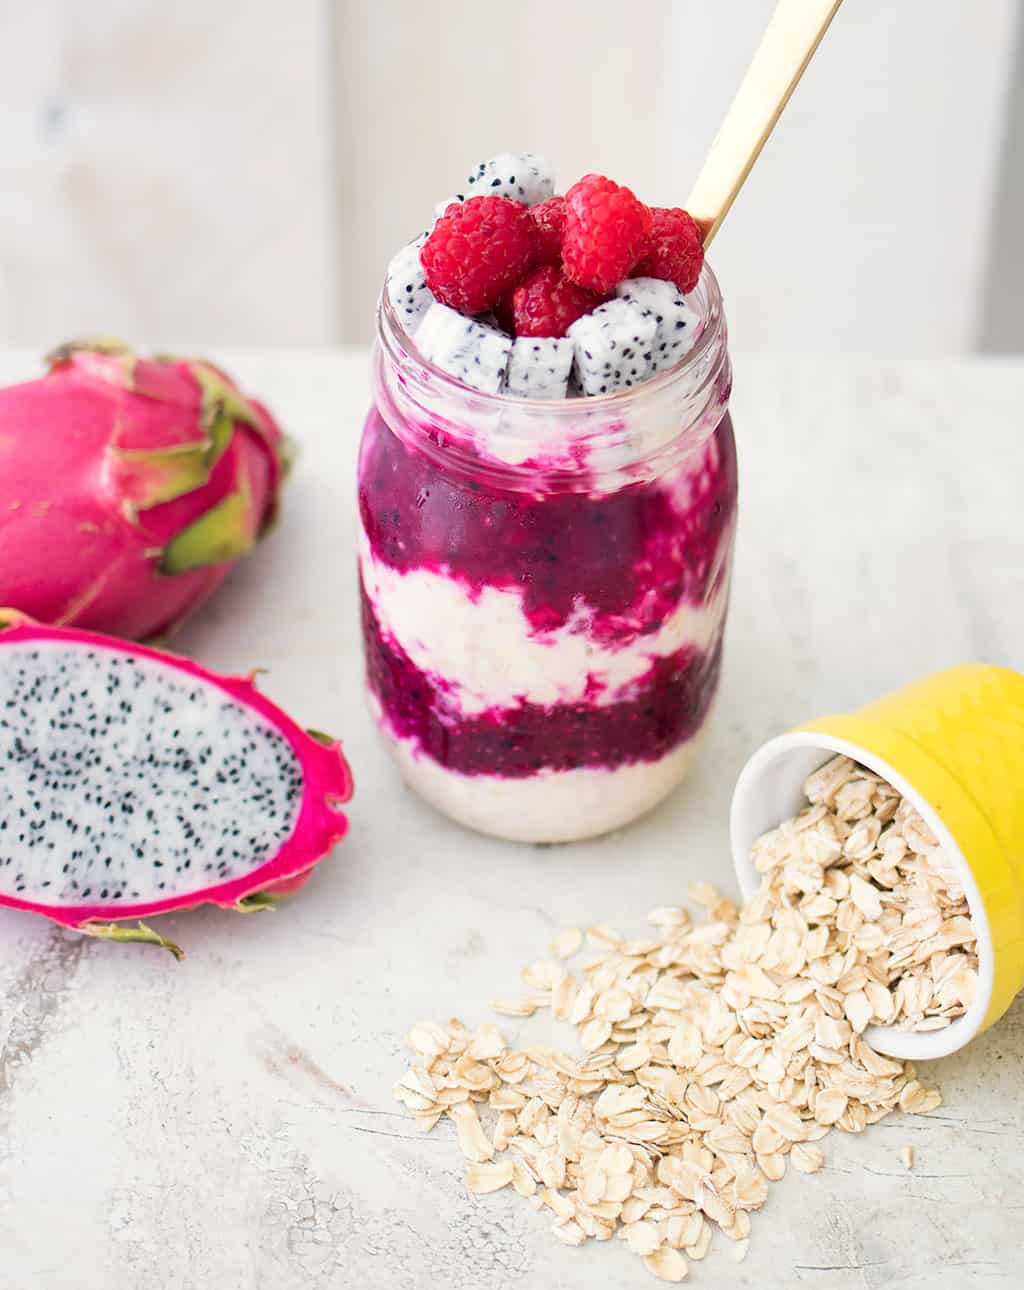 Dragon Fruit Overnight Oats with Chia Seeds